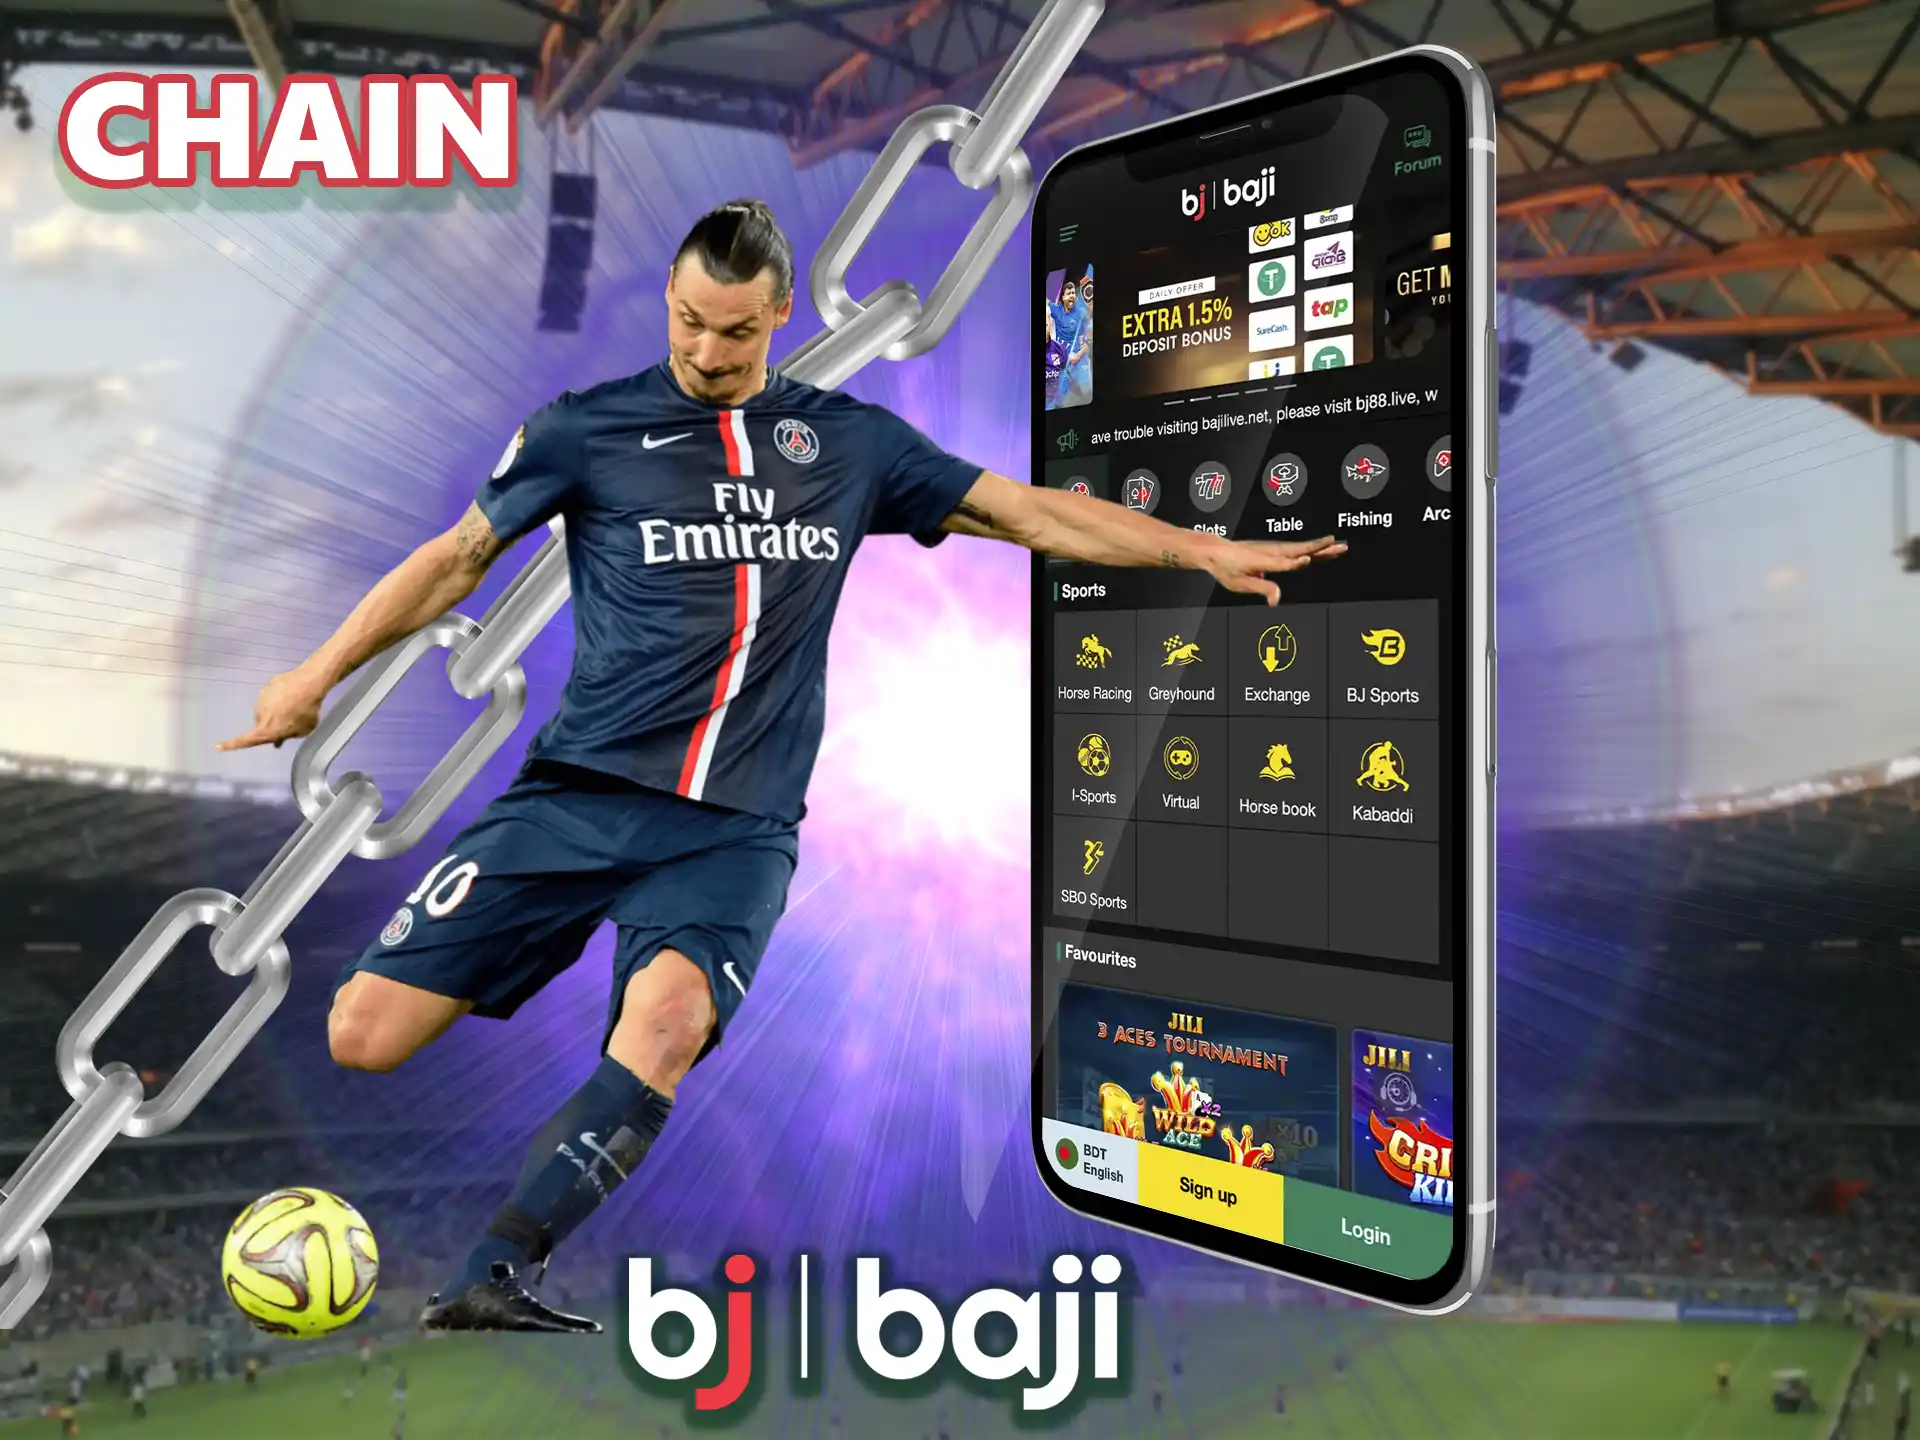 This is a very progressive type of betting, here you can place predictions for multiple outcomes at once in the Baji site and app.